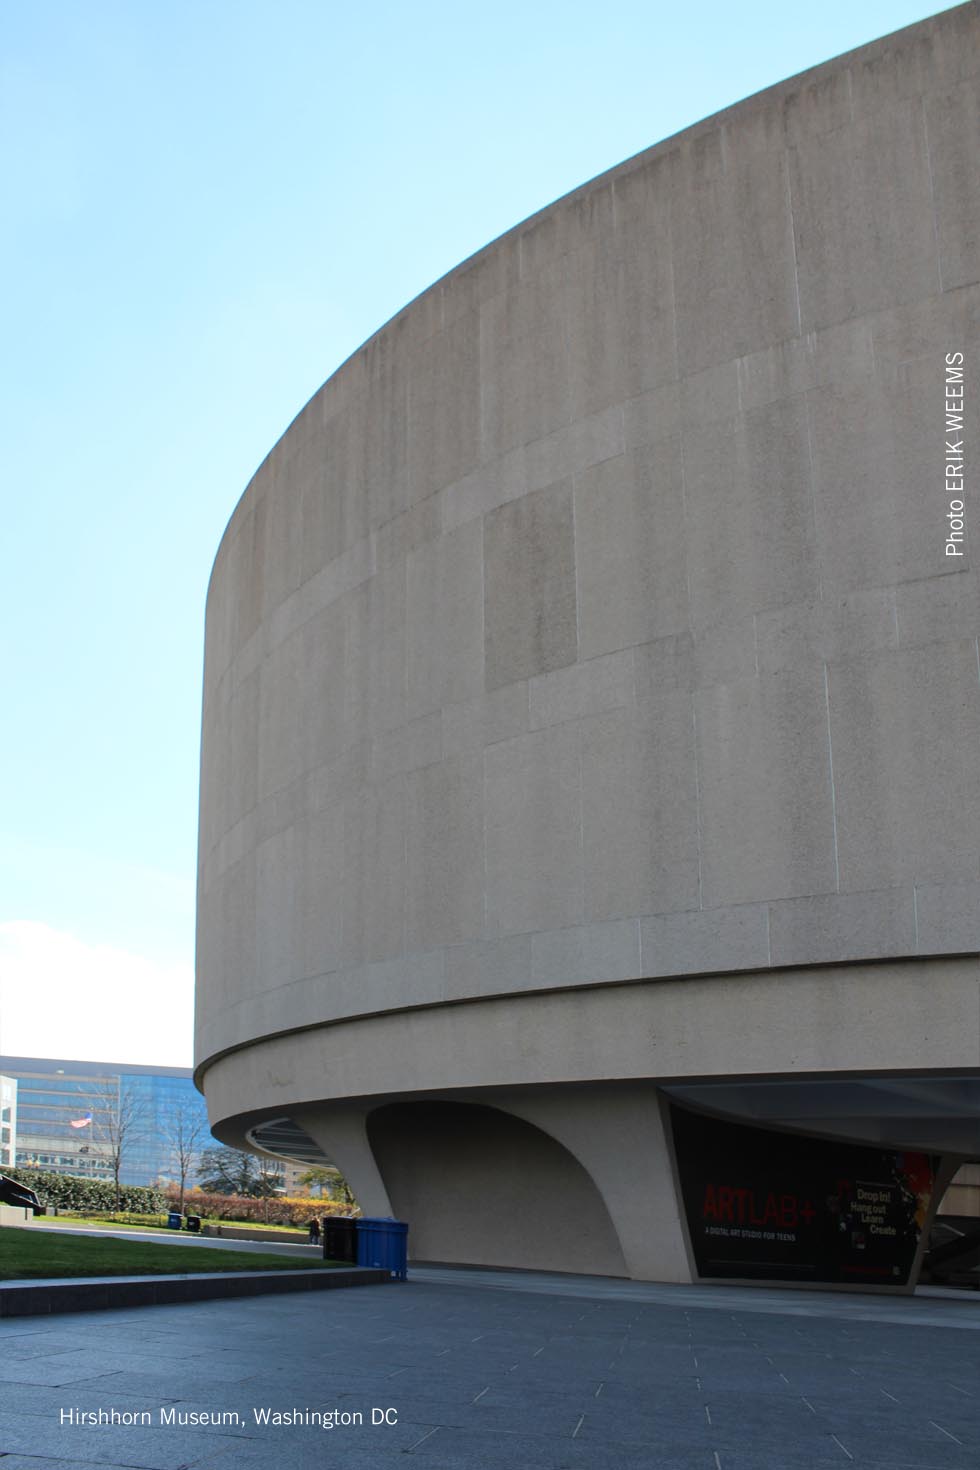 Hirshhorn Museum in DC, the National Mall